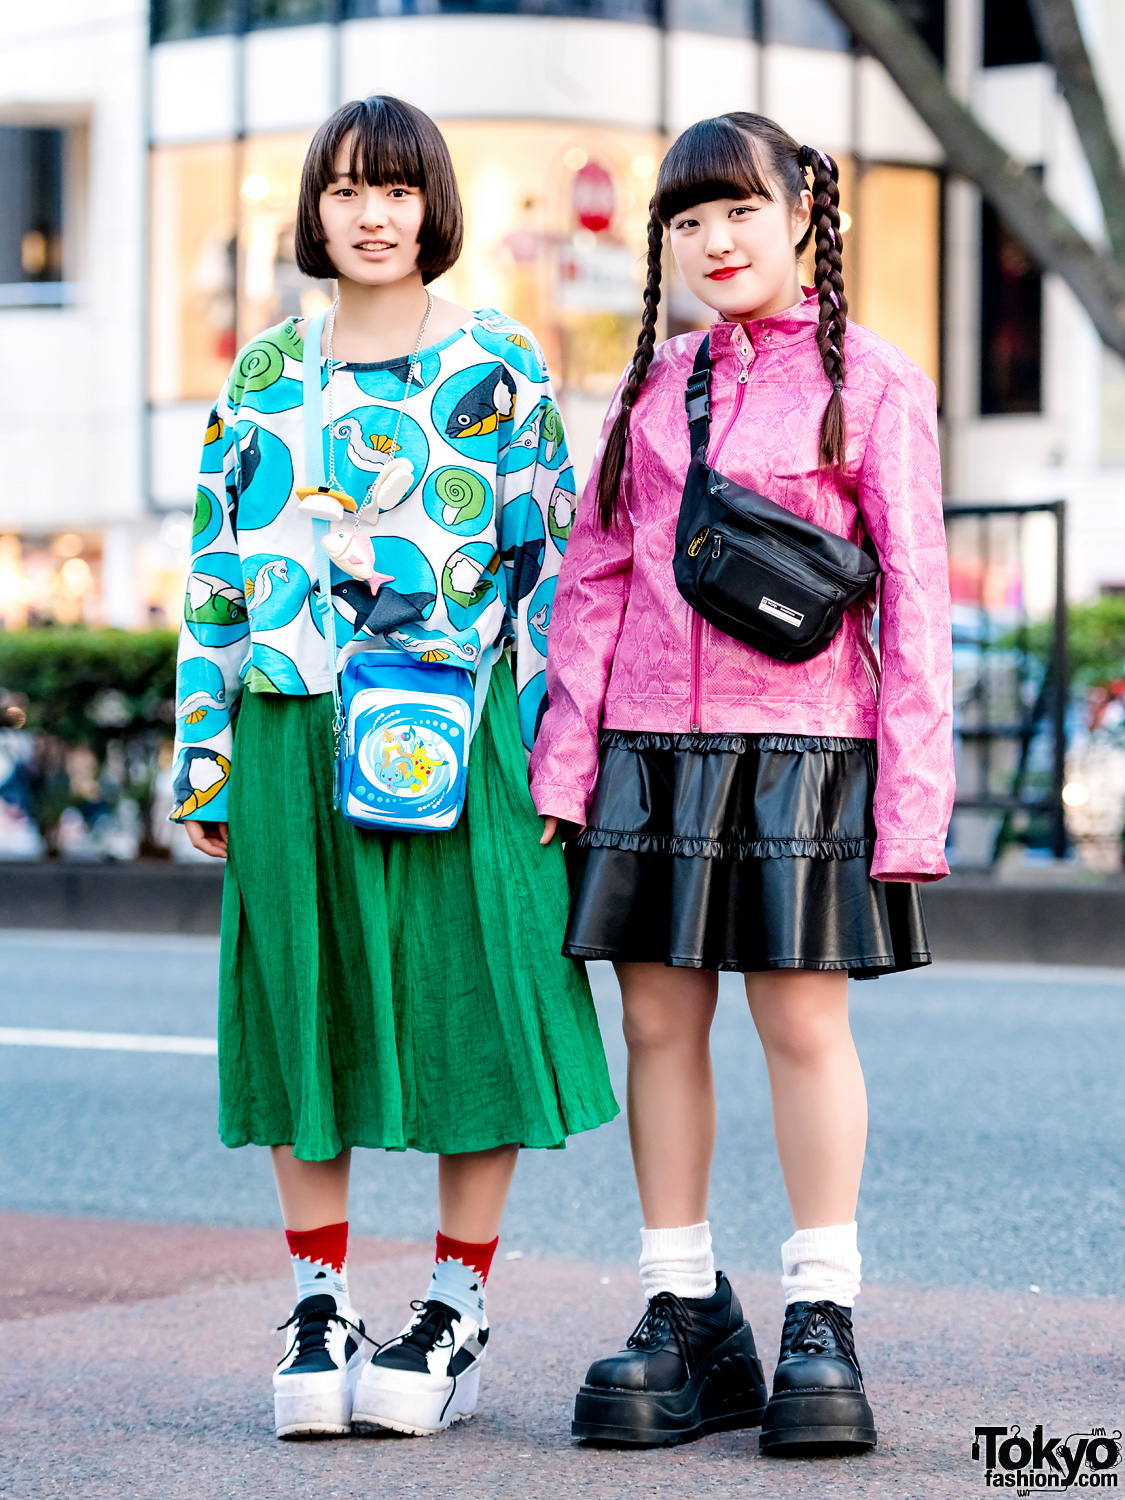 Harajuku Teens in Colorful Street Styles w/ RRR By Sugar Spot Factory